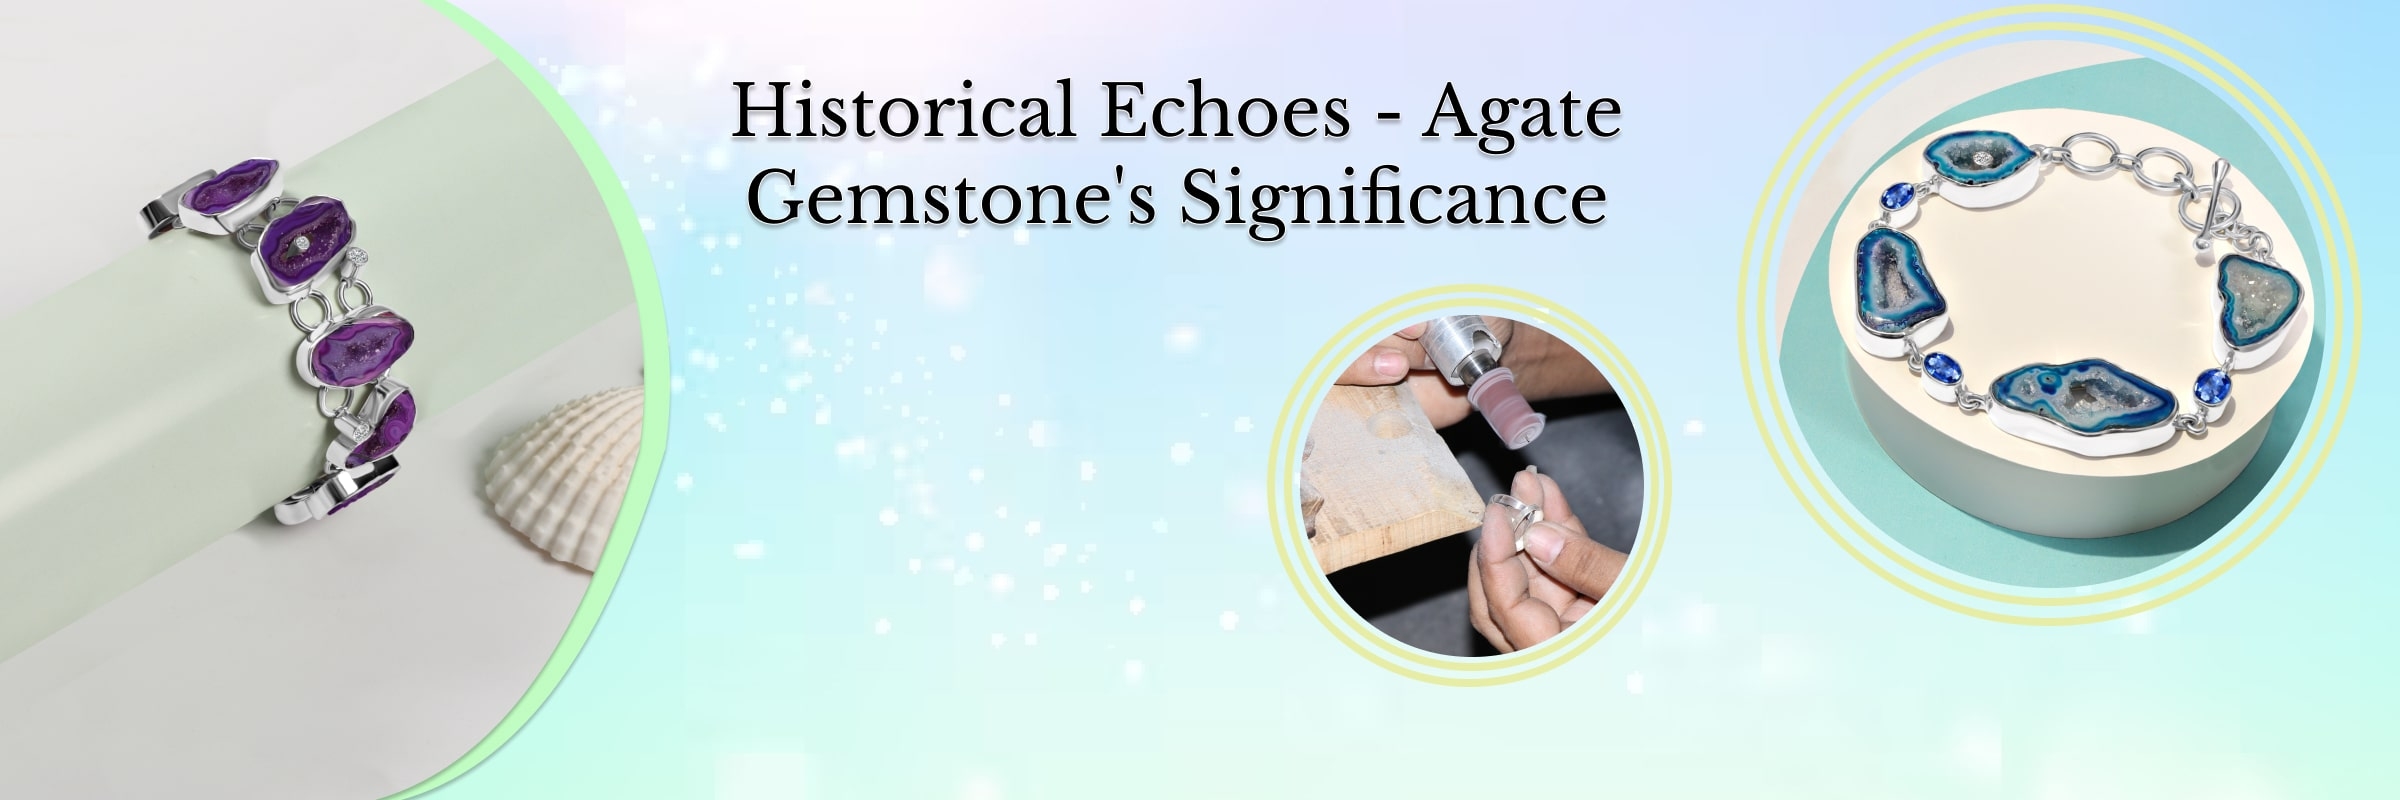 Significance and History of Agate Gemstone